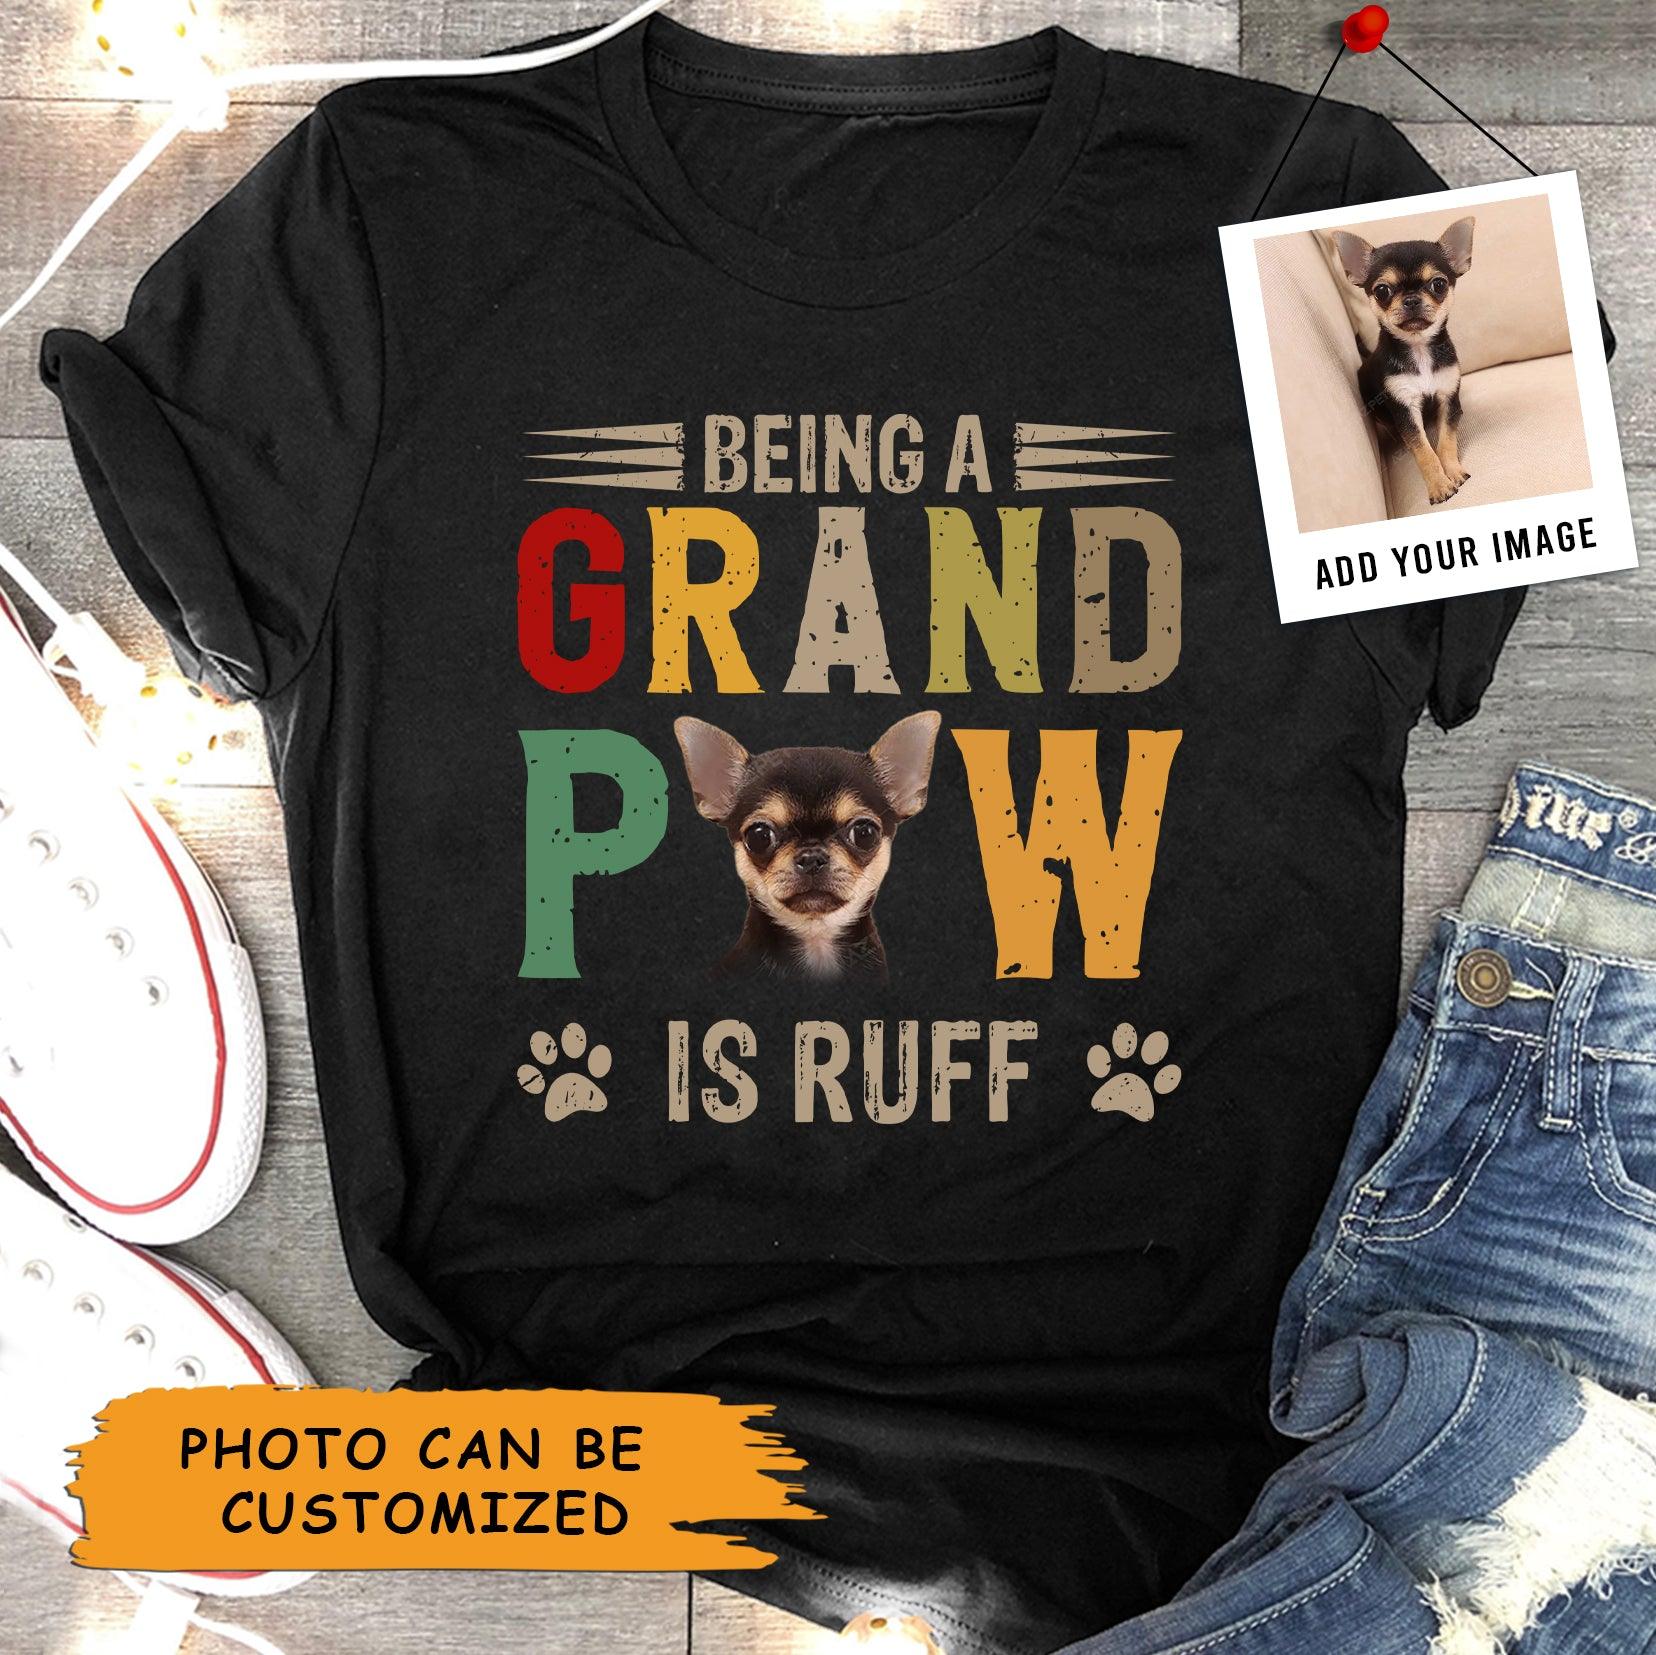 Chihuahua Dog Unisex T Shirt Custom - Customize Photo Being A Grand Paw Is Ruff Personalized Unisex T Shirt - Gift For Dog Lovers, Friend, Family - Amzanimalsgift